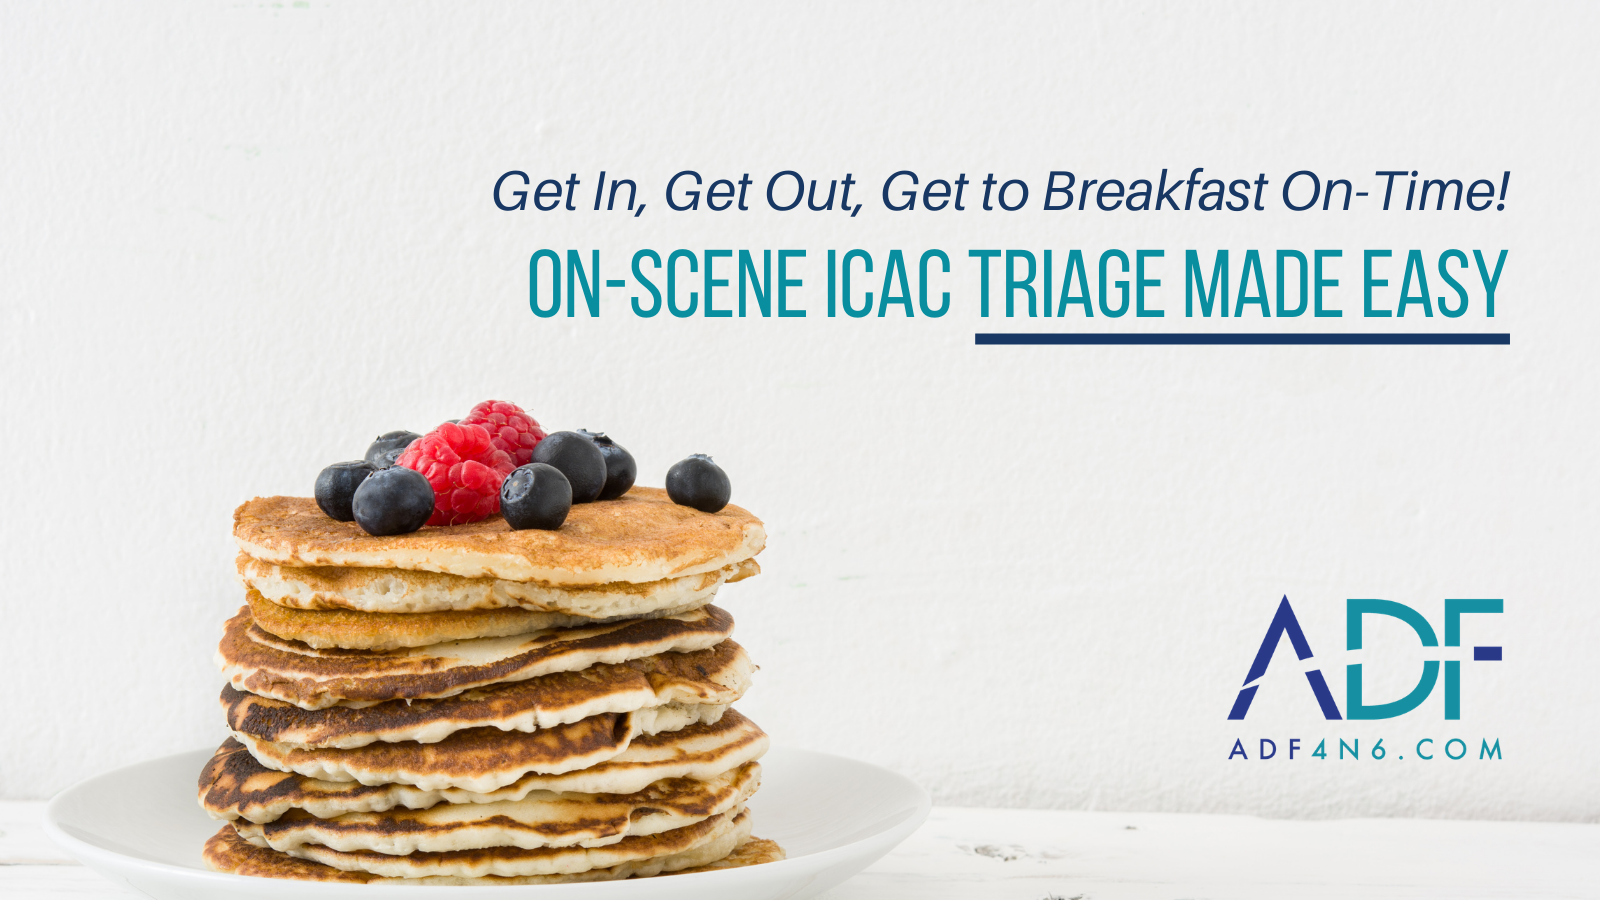 Get In, Get Out, Get to Breakfast On-Time! Triage Made Easy